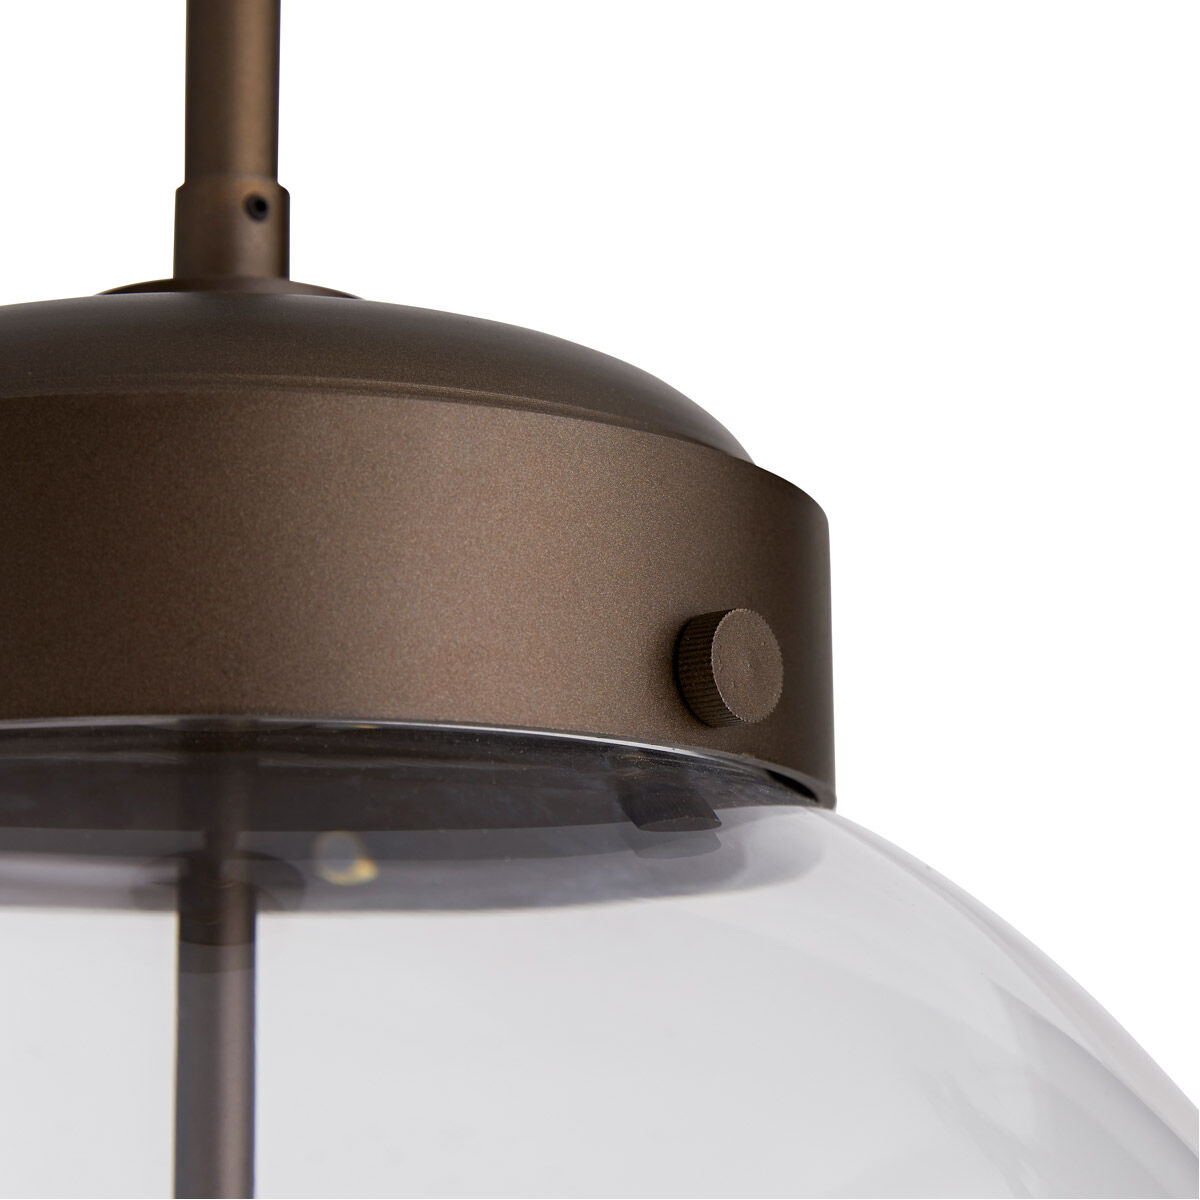 Arteriors 49208 Reeves 1 Light 16 inch Aged Brass Outdoor Pendant